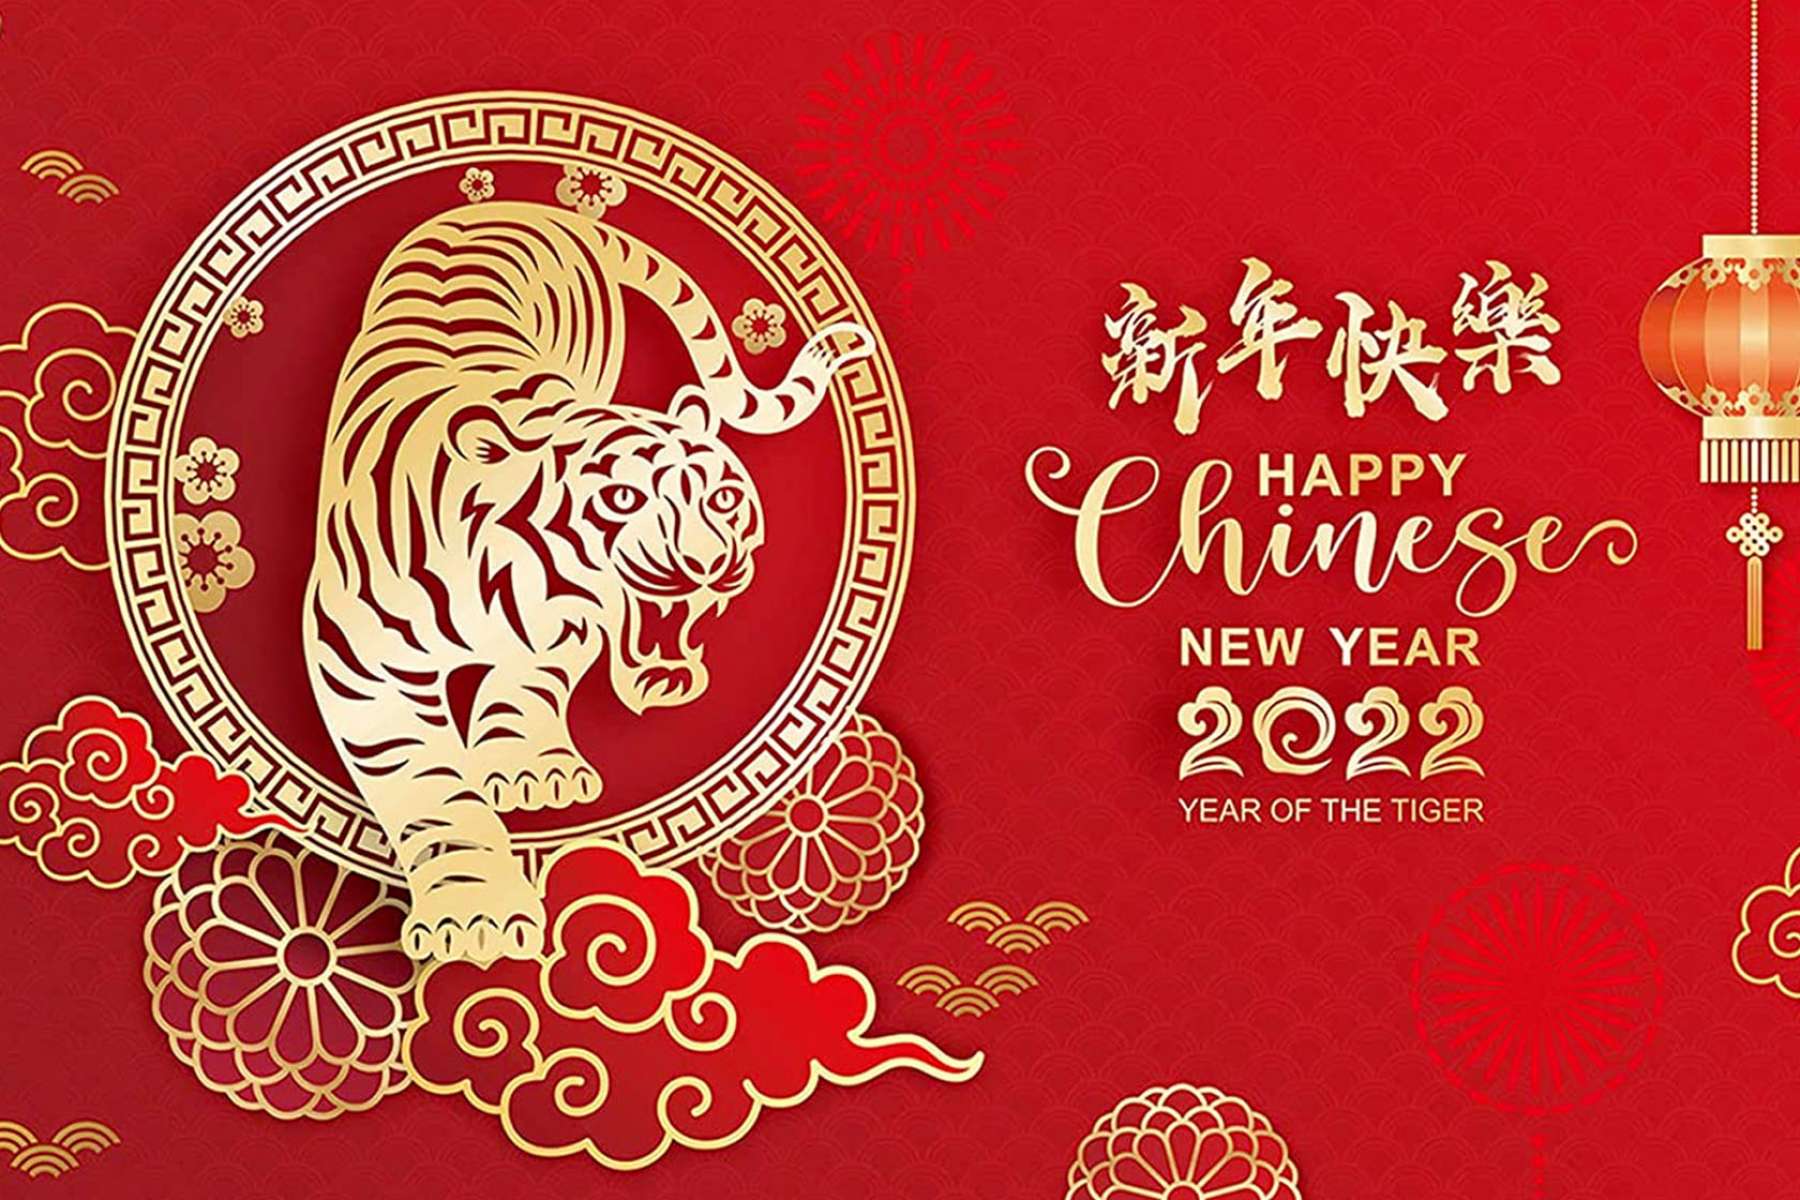 2022 images chinese new year